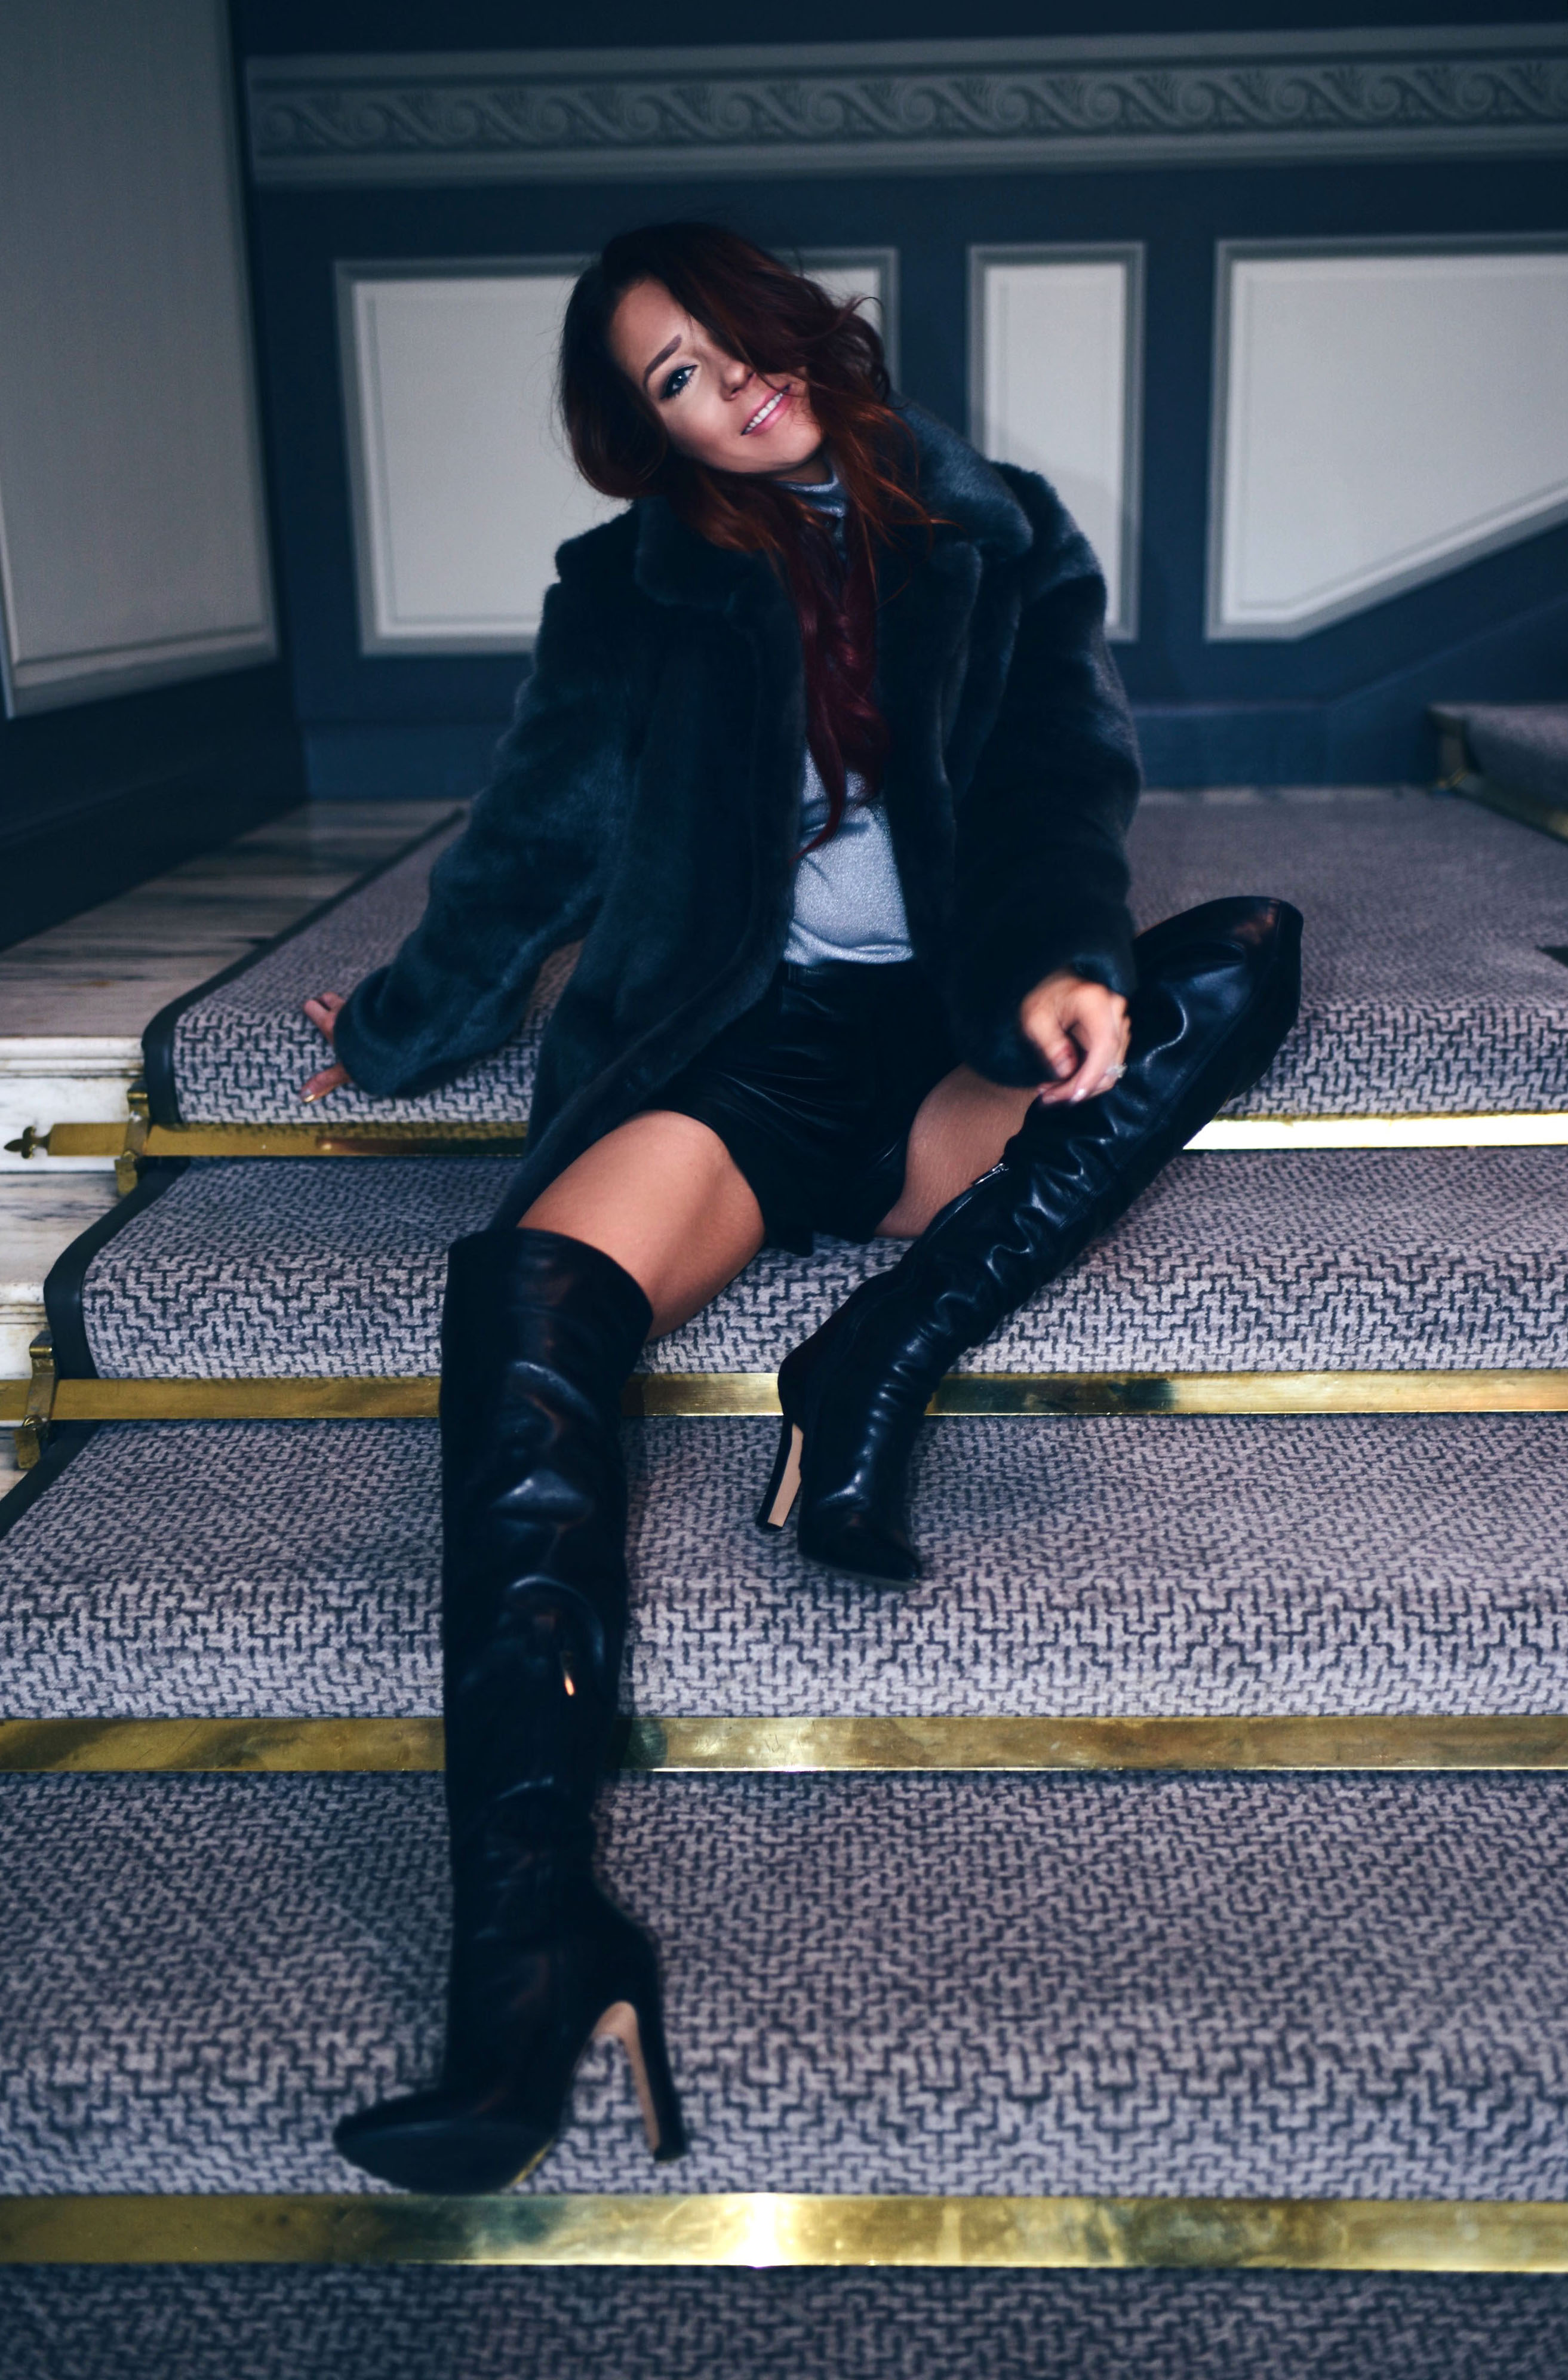 reiss-winter-jacket-leather-shorts-over-the-knee-boots